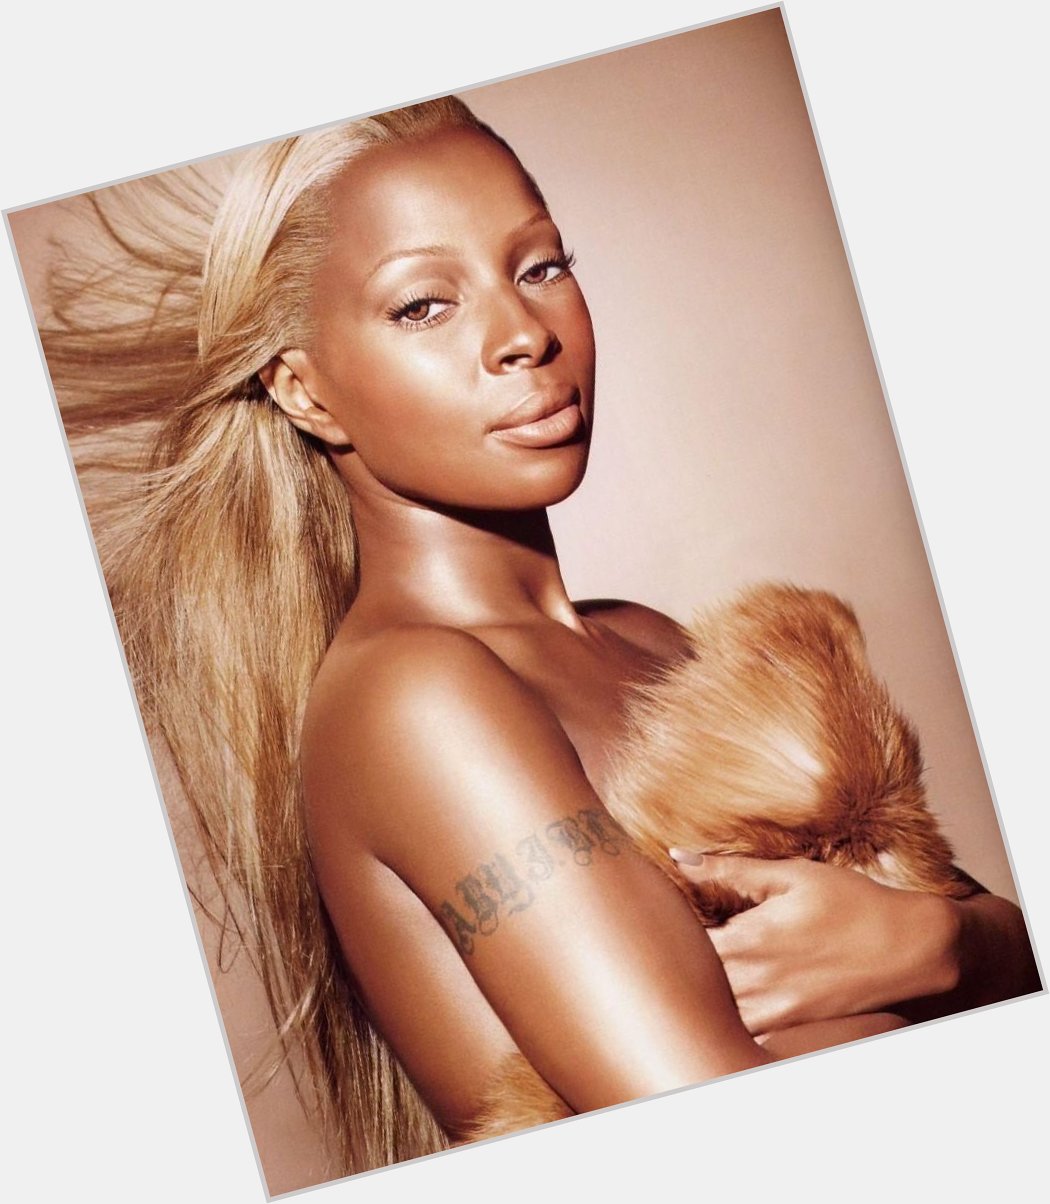 Happy 50th birthday to the legendary, the queen of hip-hop soul, mary j. blige 